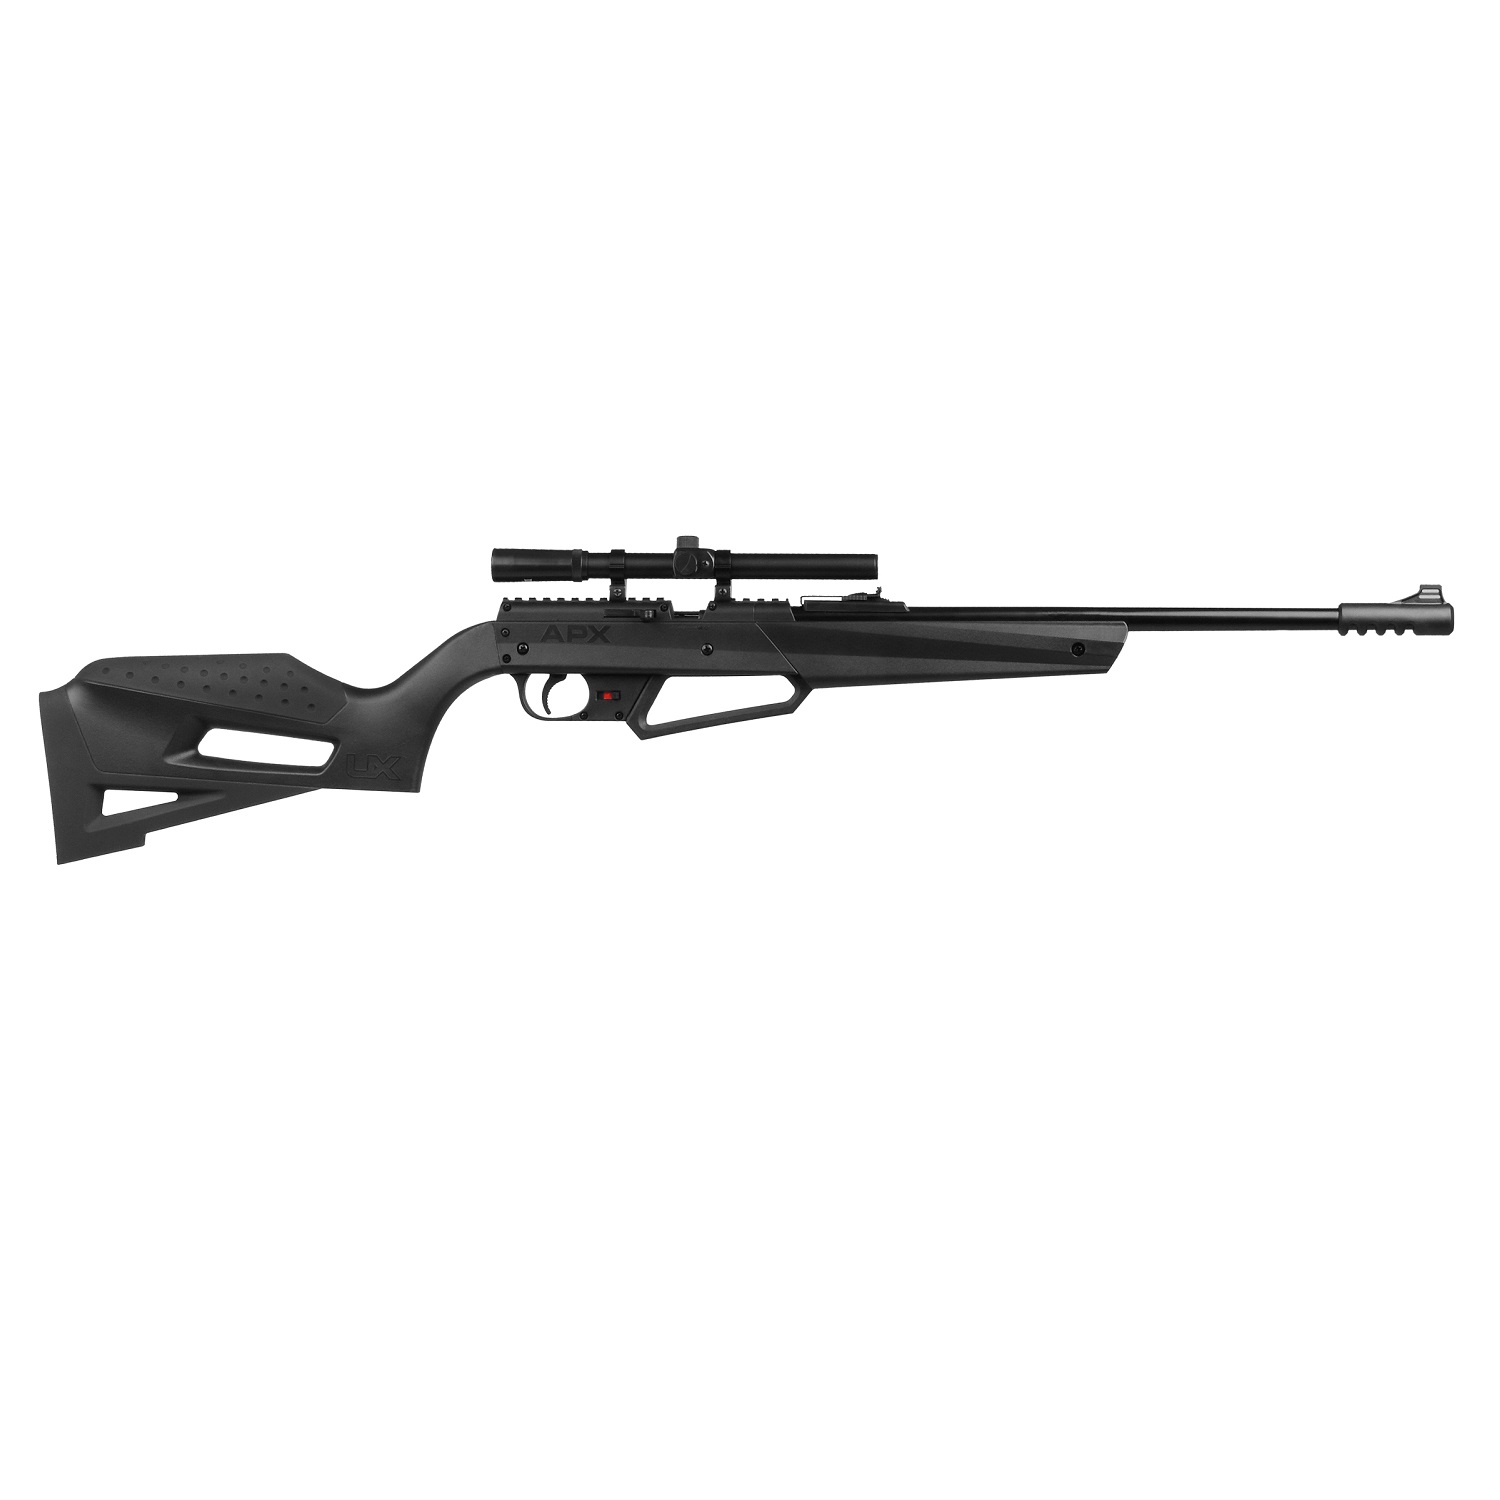 Umarex USA 2251600 NXG APX Youth Spring Piston 177 Pellet,177 BB Overall Black with Synthetic Stock Includes Scope